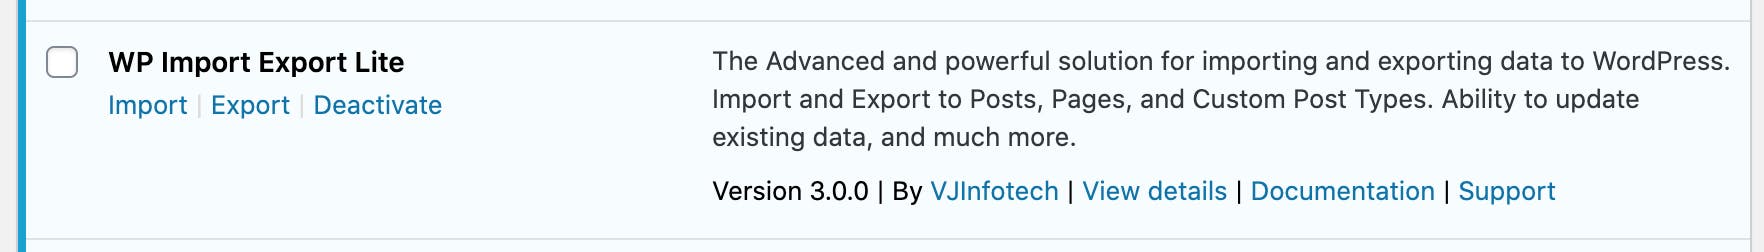 wp-import-export-lite.png